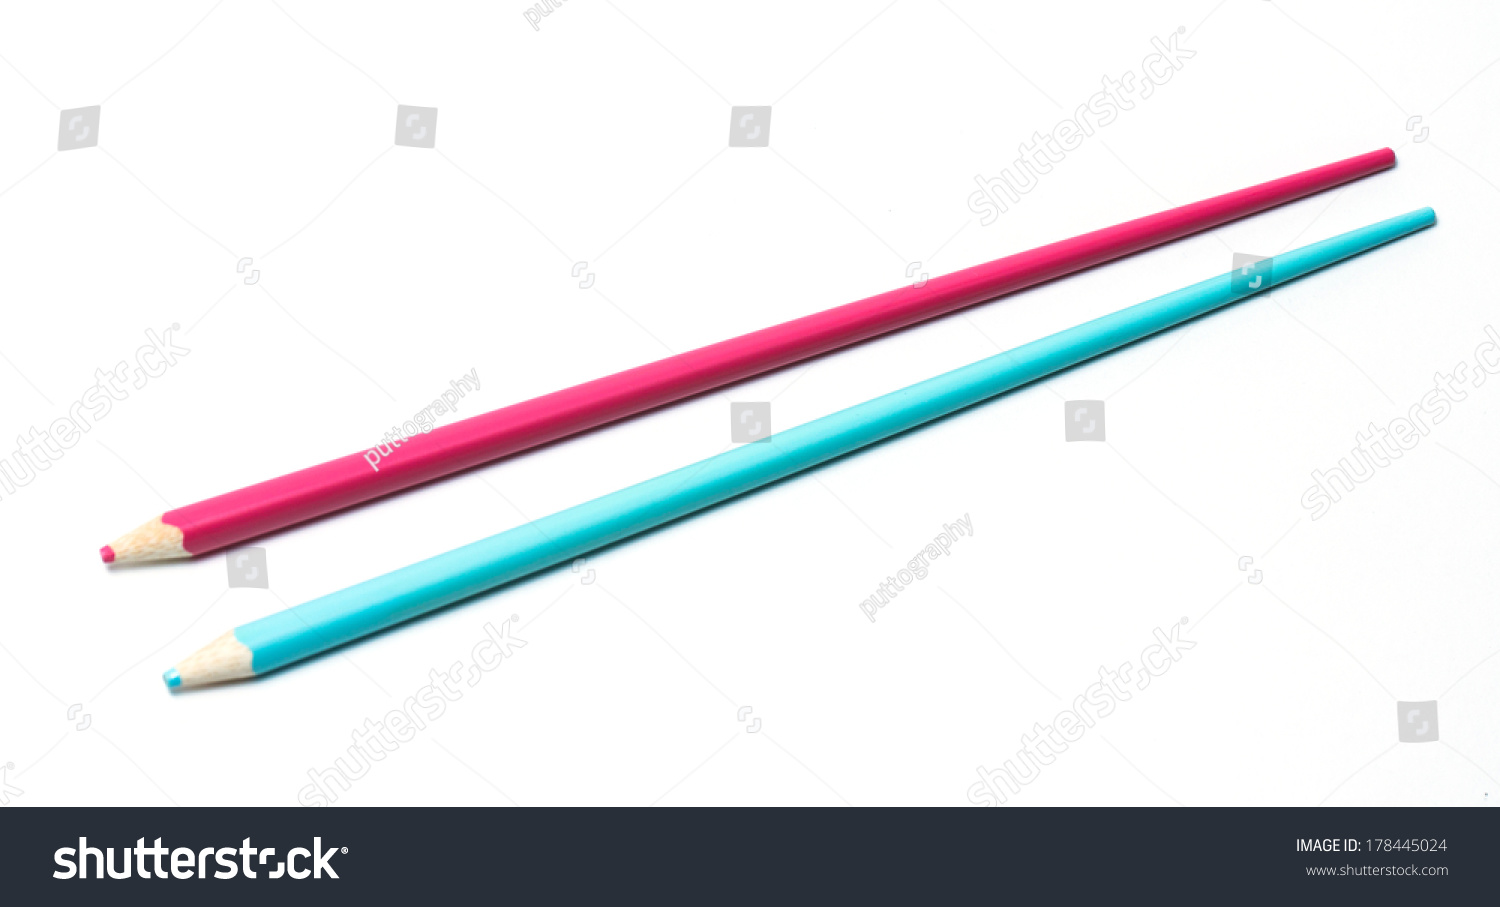 Pink and blue color pencil in shape of chopsticks. Isolated on white background.  #178445024